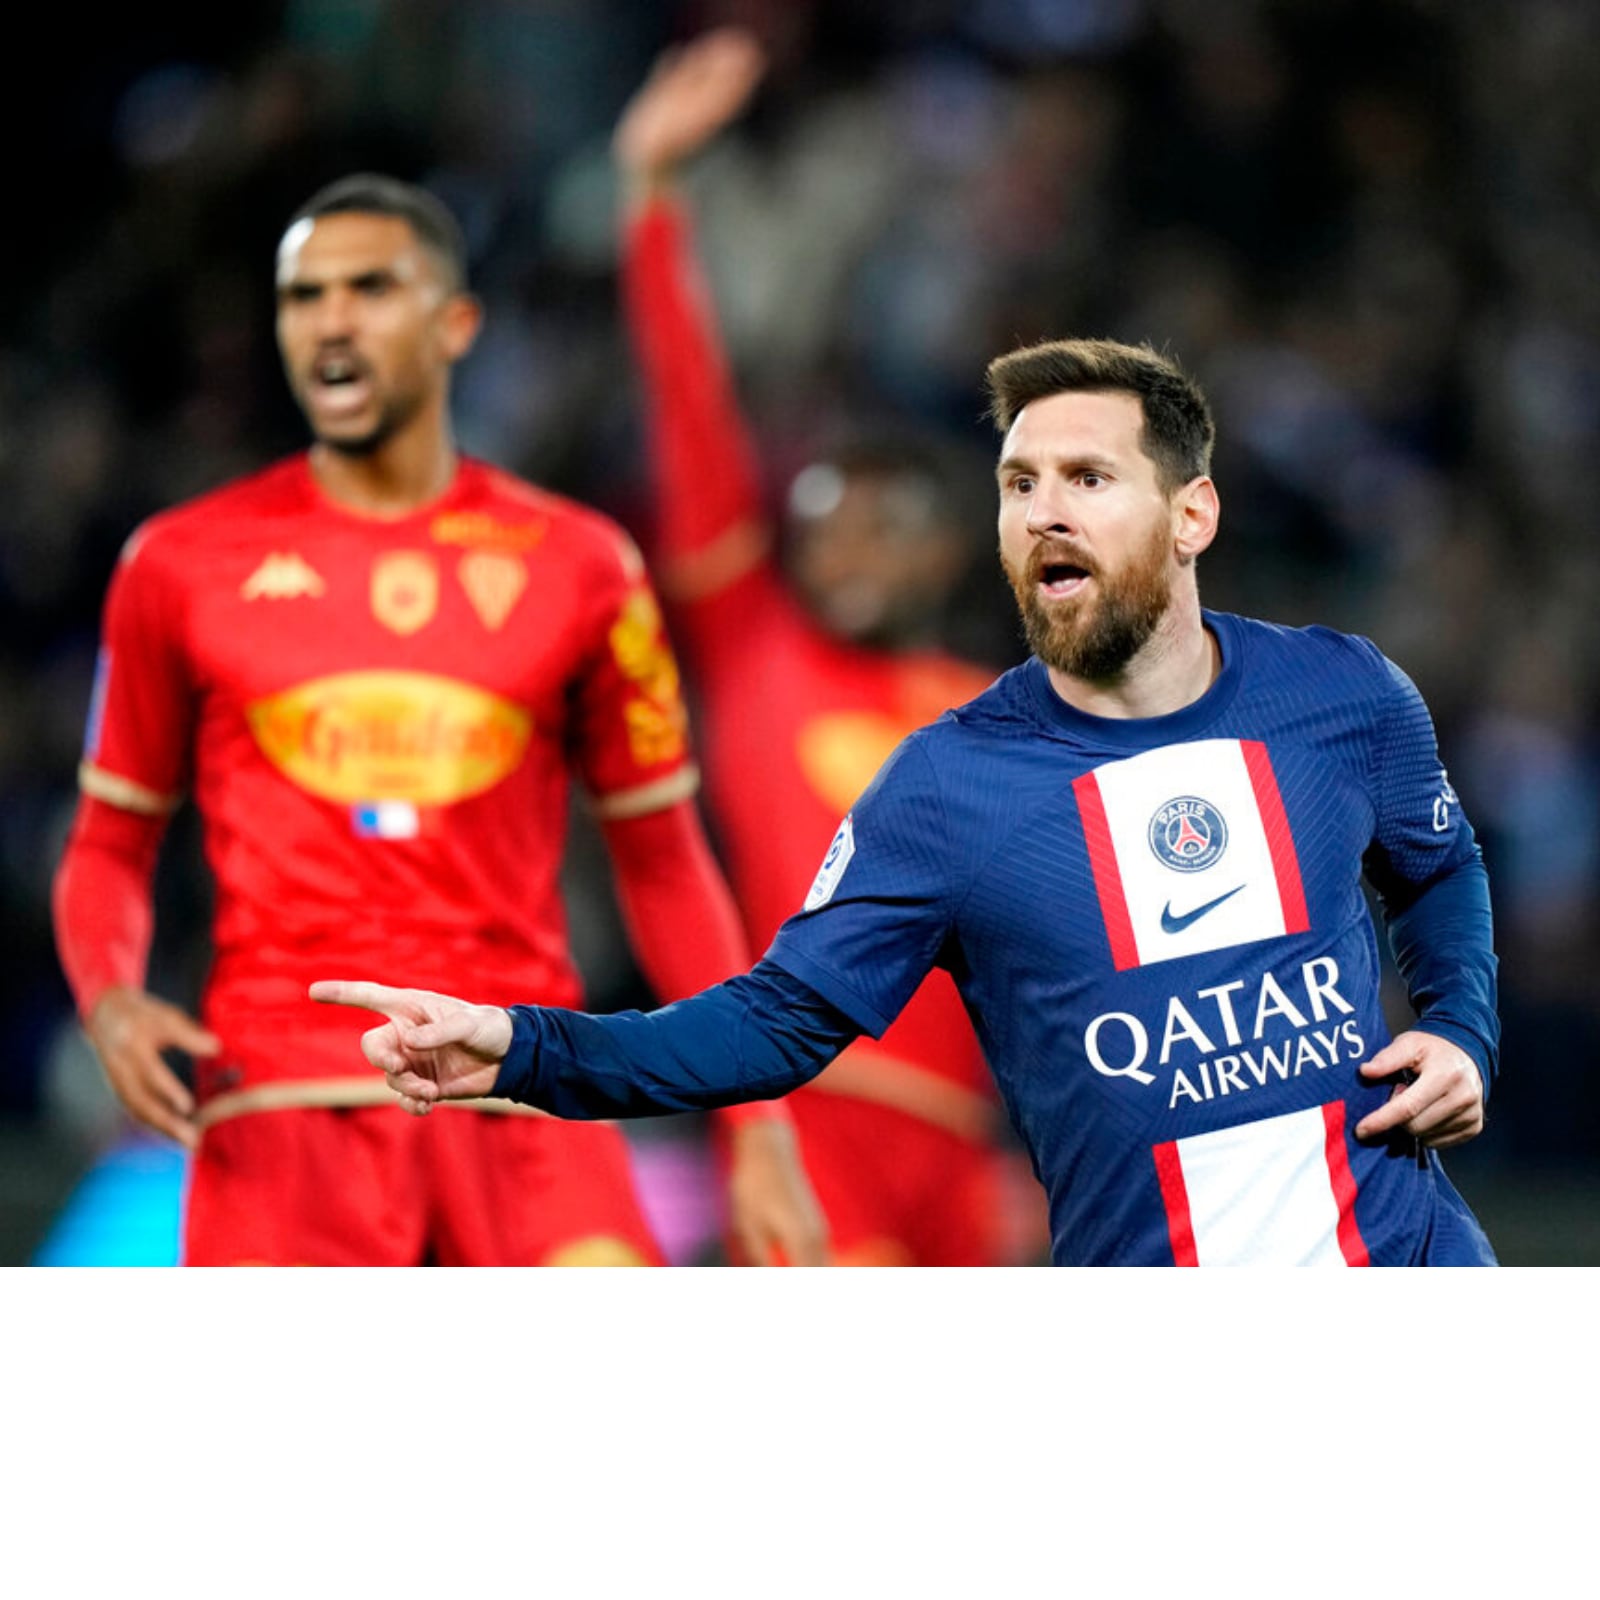 PSG vs Clermont Highlights, Ligue 1: Lionel Messi's last match for PSG ends  in defeat as they go 2-3 down to Clermont